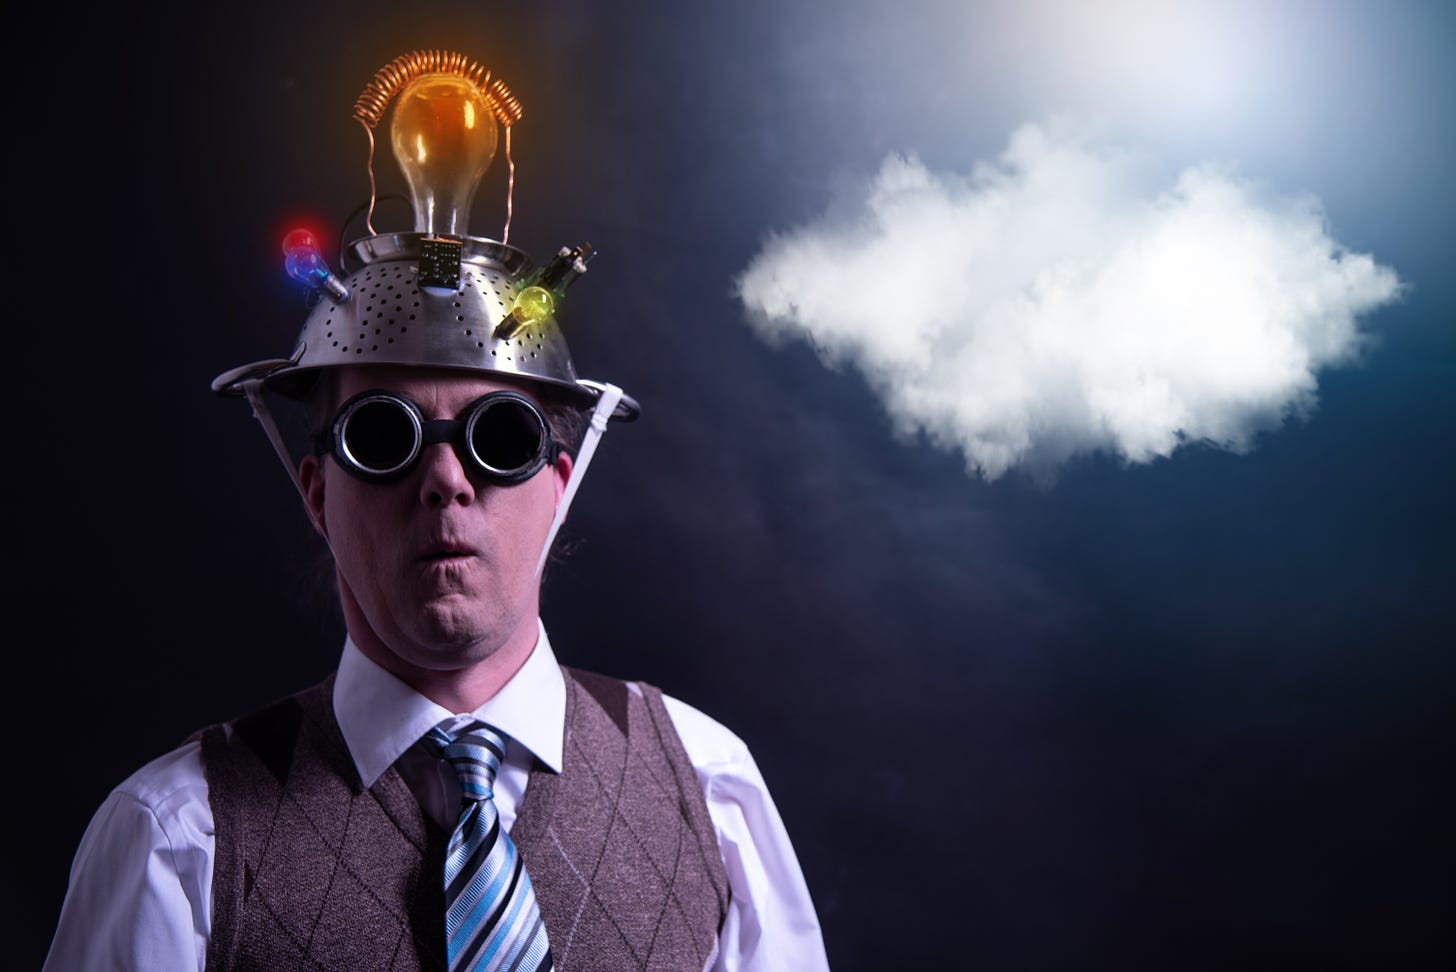 A cloud tries to get away from a man wearing goggles with a colander on his head.